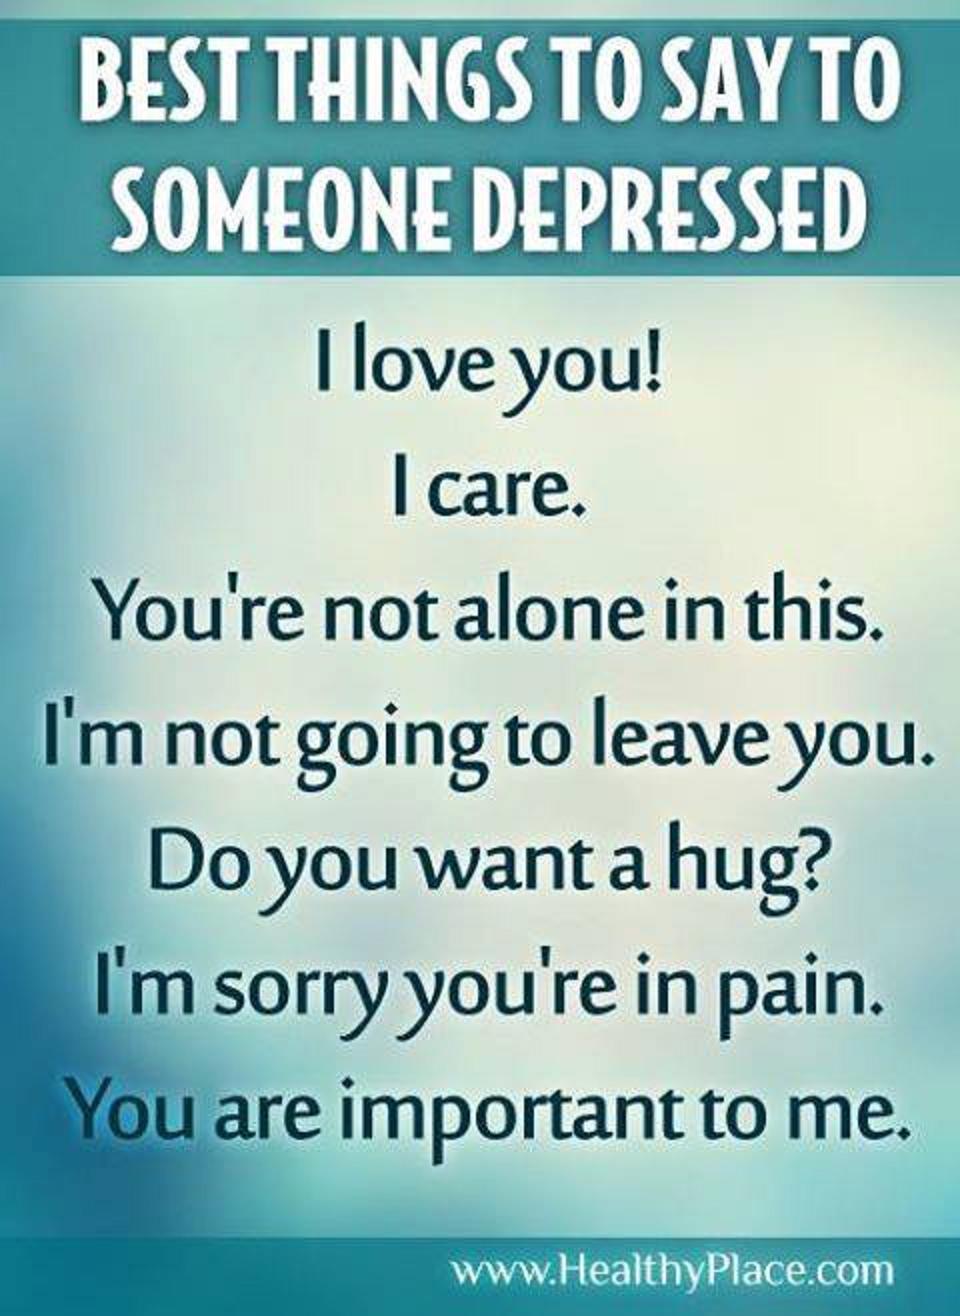 Message for depressed person